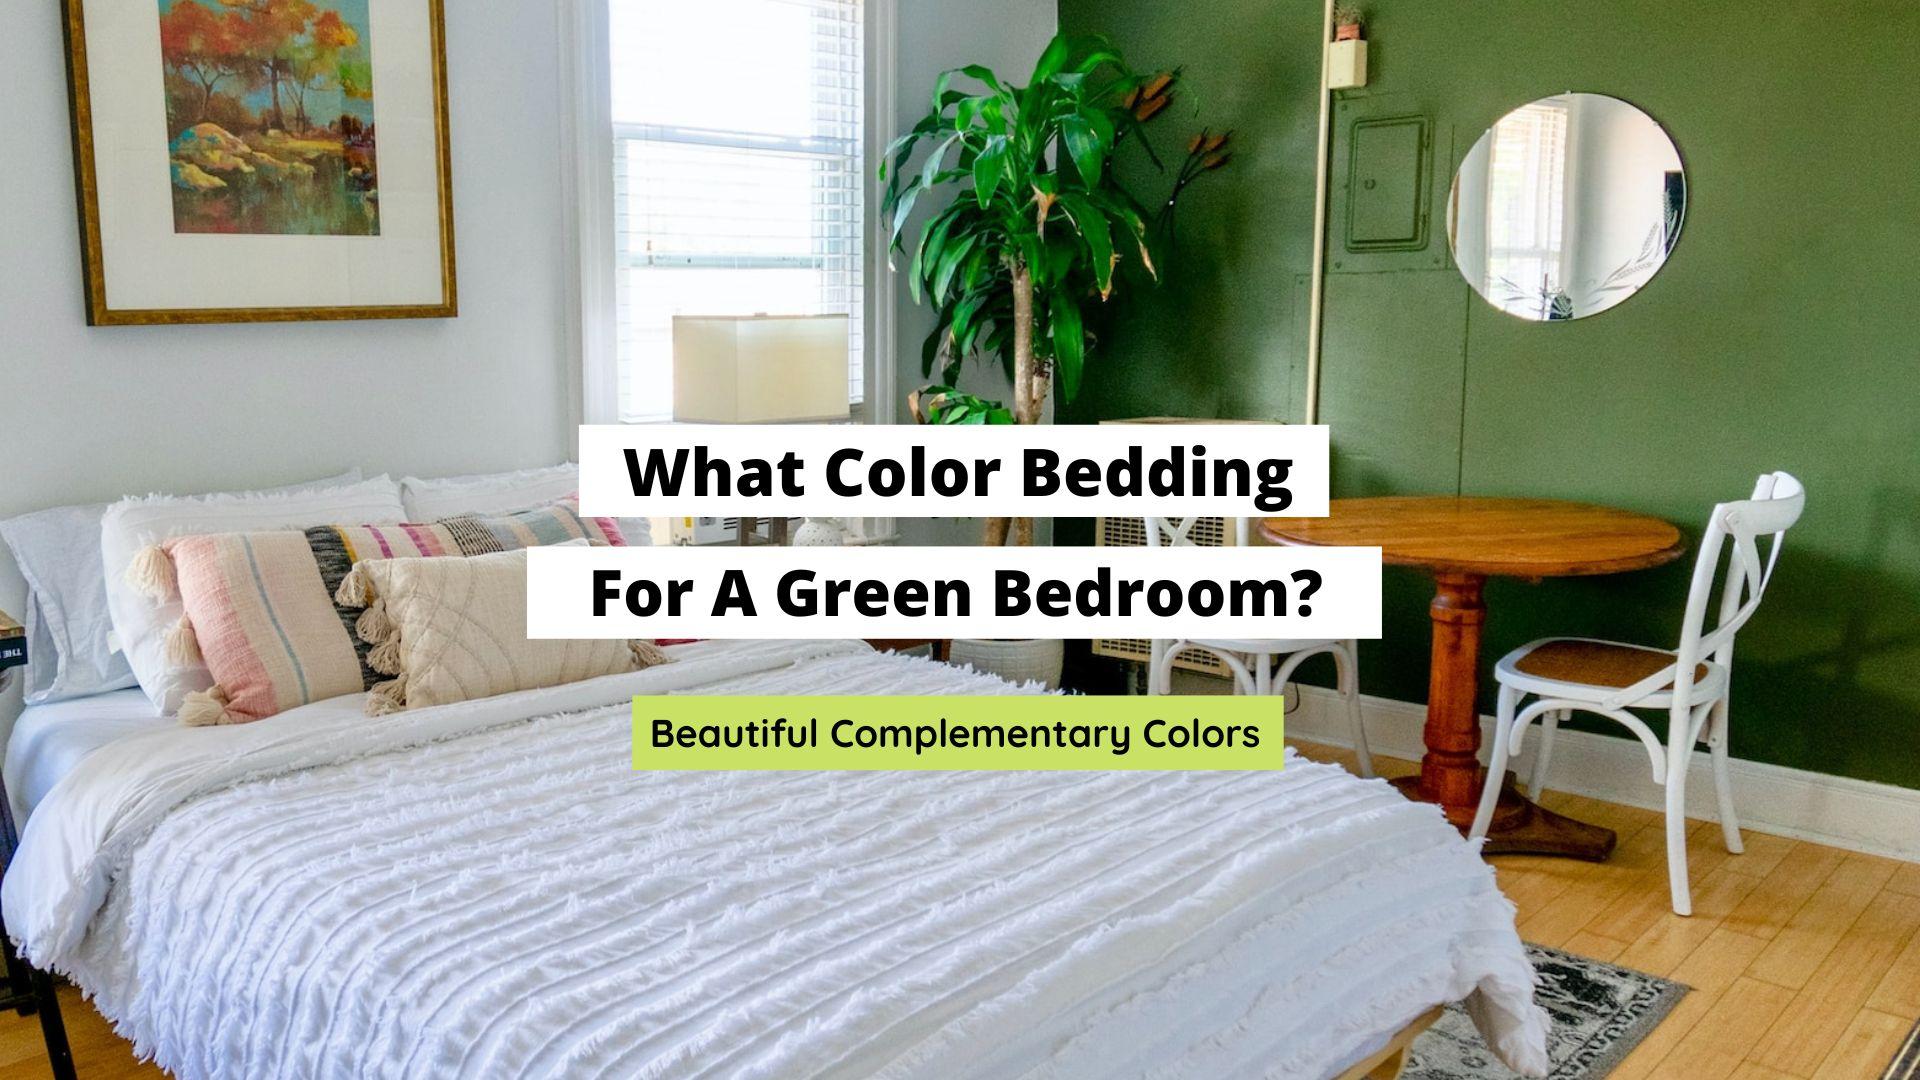 What Color Bedding For A Green Bedroom